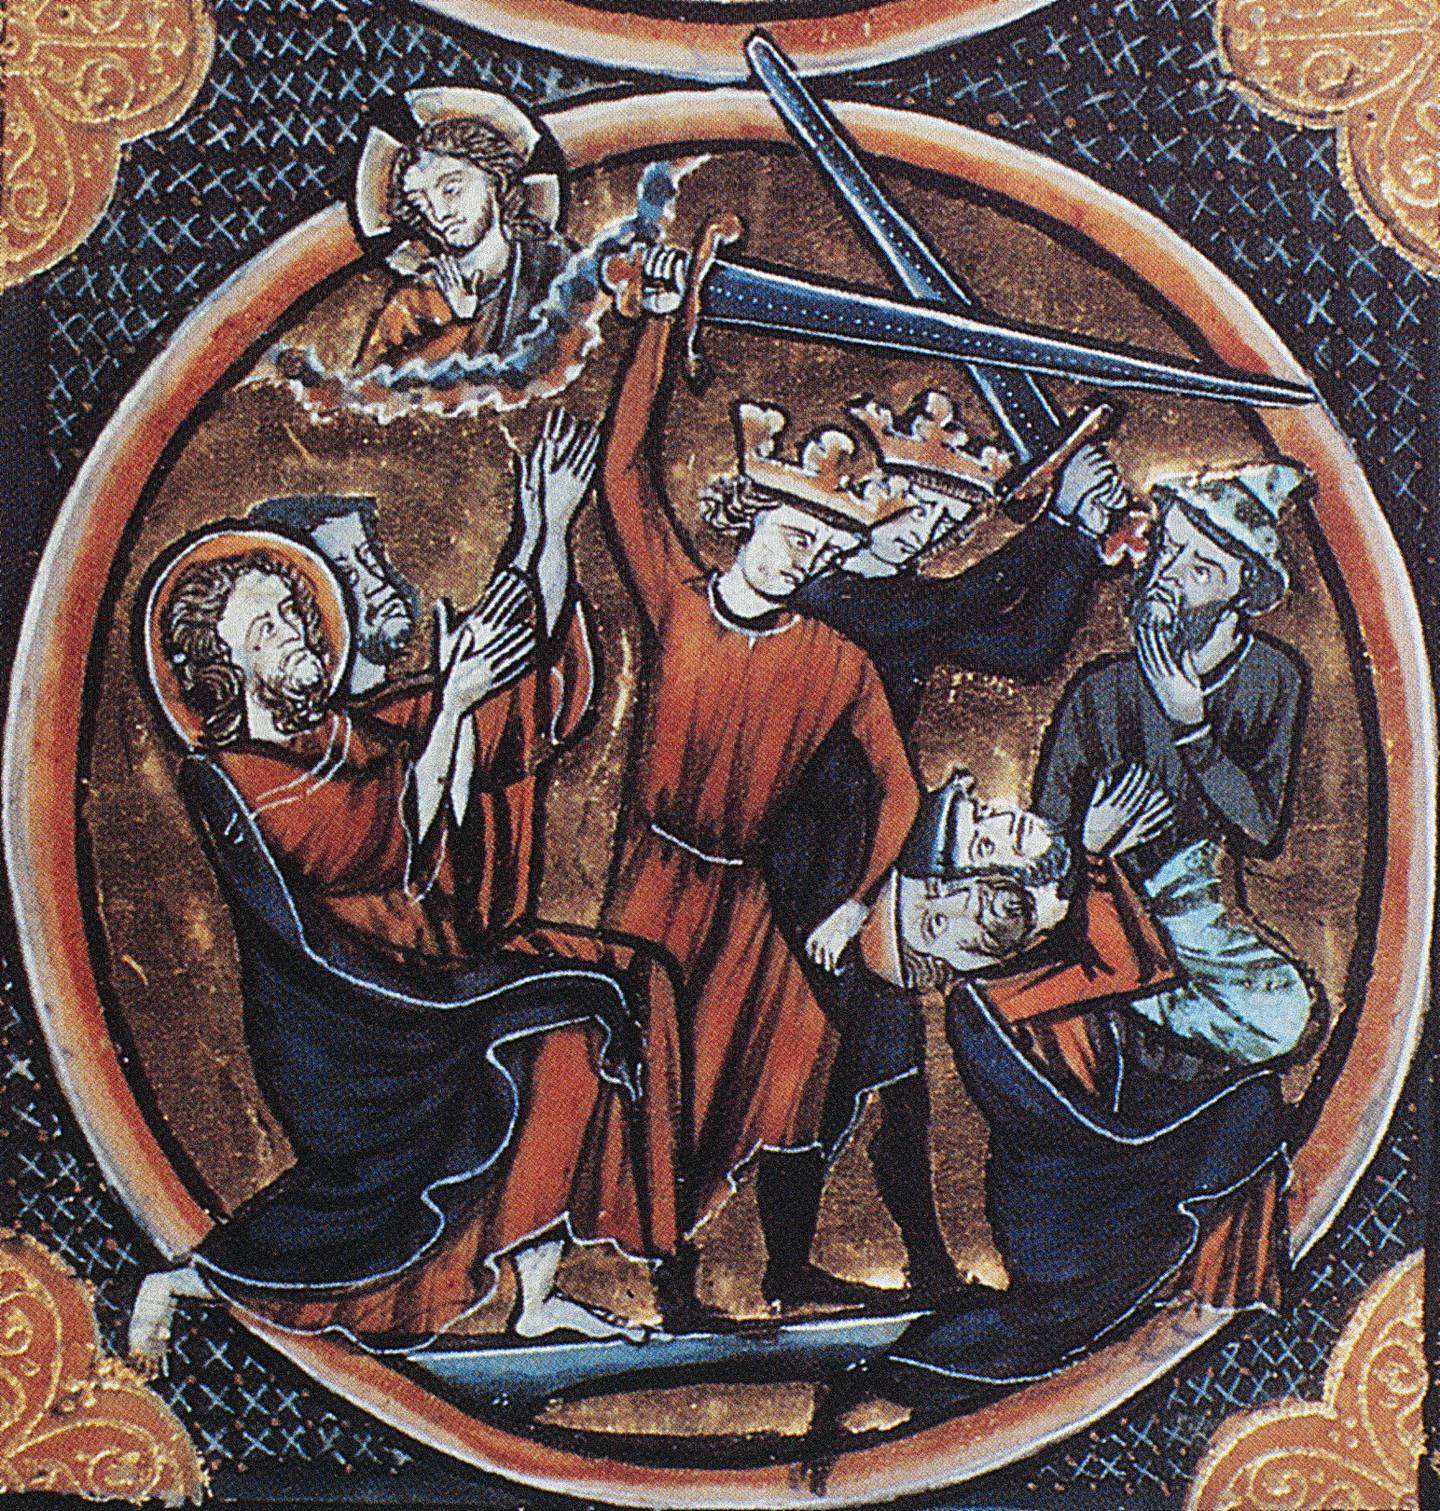 JEWS PERSECUTED, c1250. Two Jews, kneeling at right, about to be put to death by the sword as revenge for the death of Jesus, who looks on at top left. Manuscript illumination, c1250, from a French Bible.